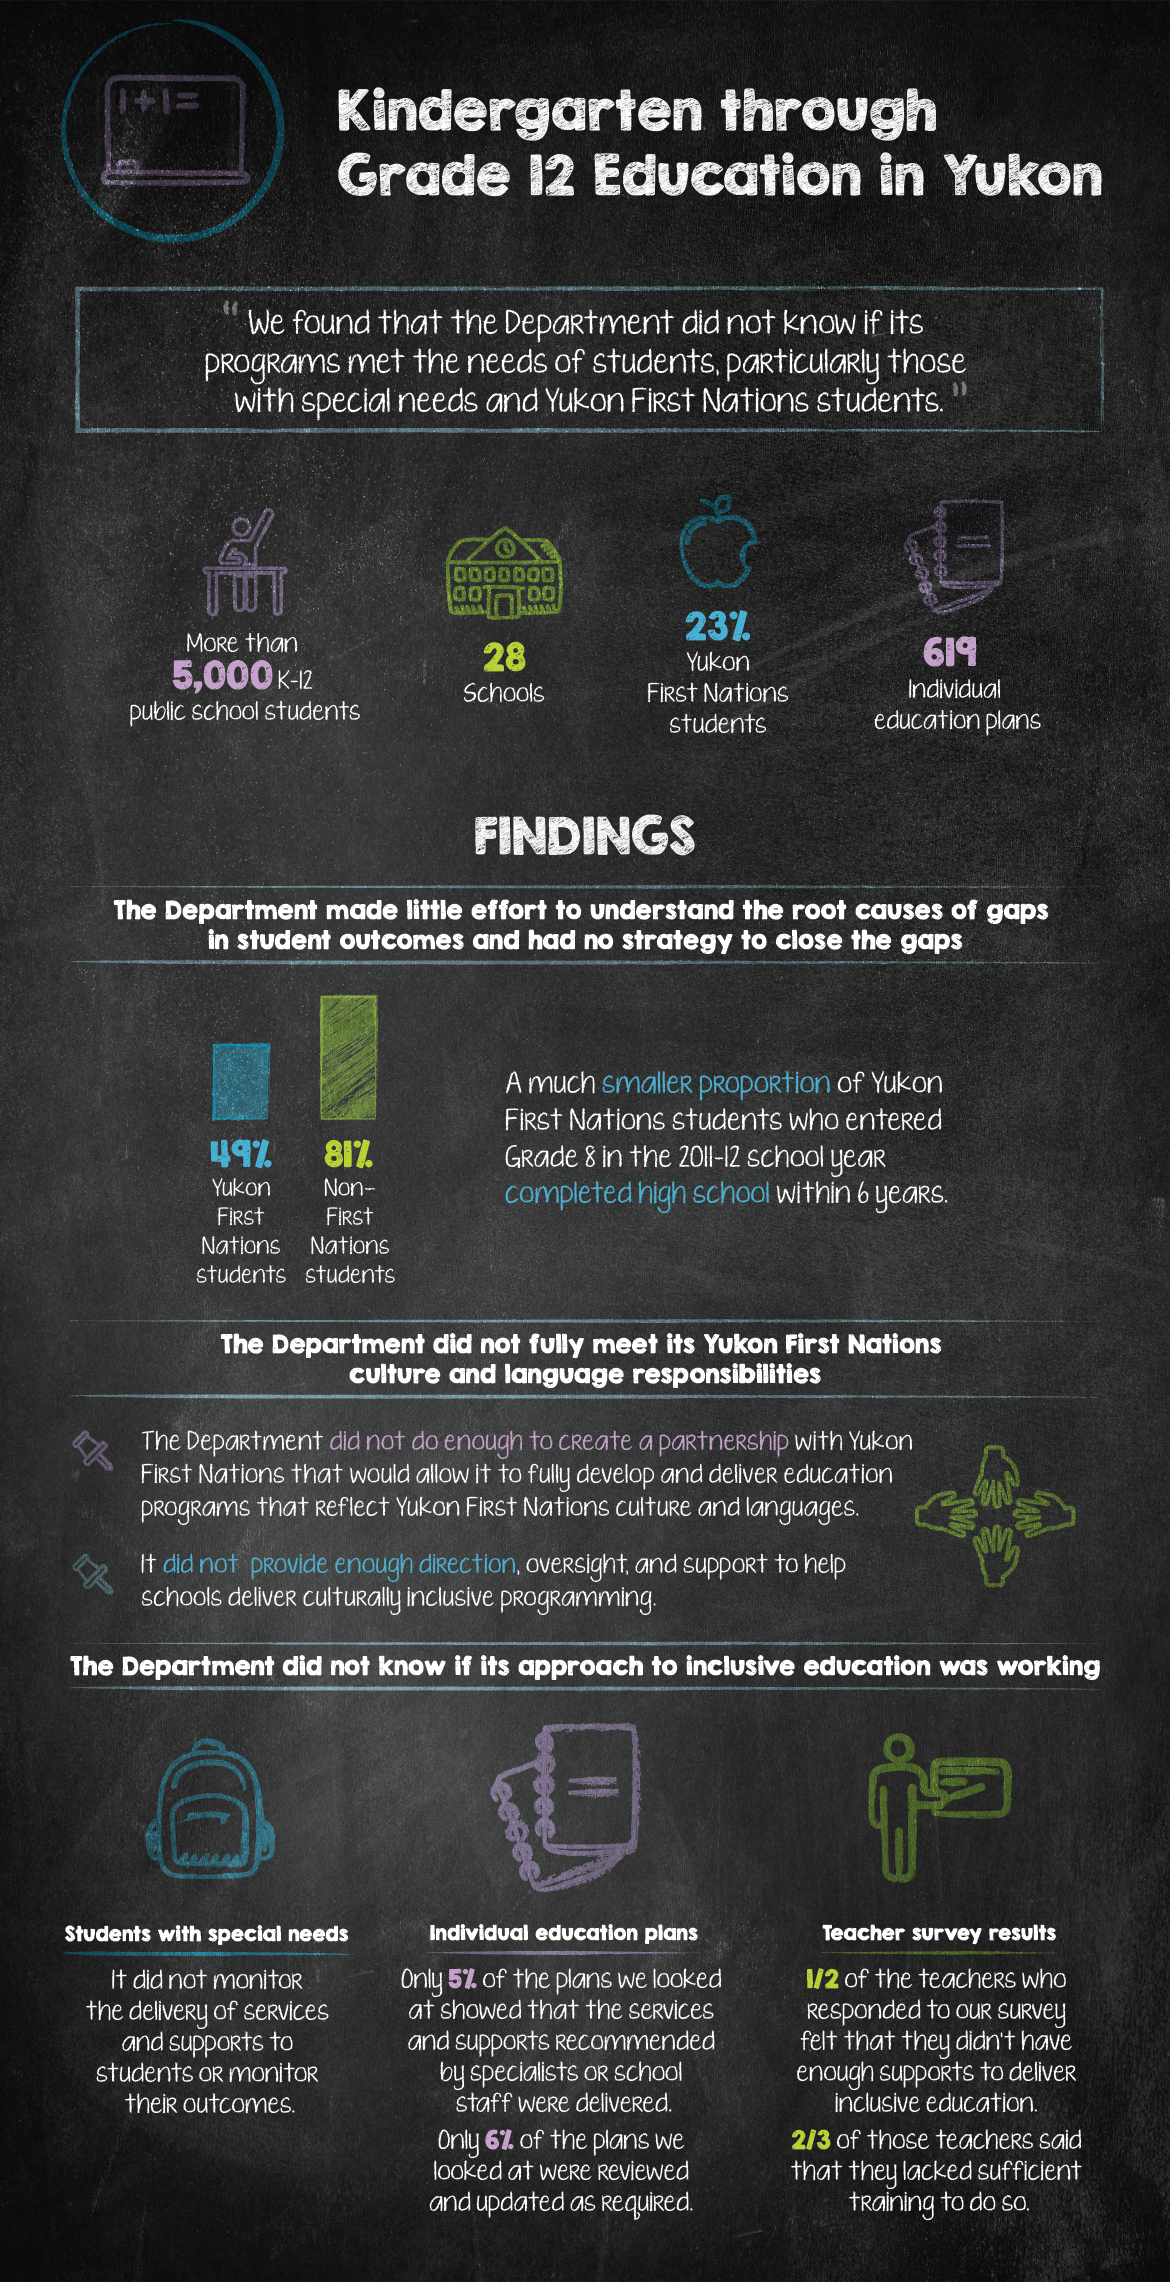 This infographic presents findings from the audit of kindergarden through Grade 12 education in Yukon